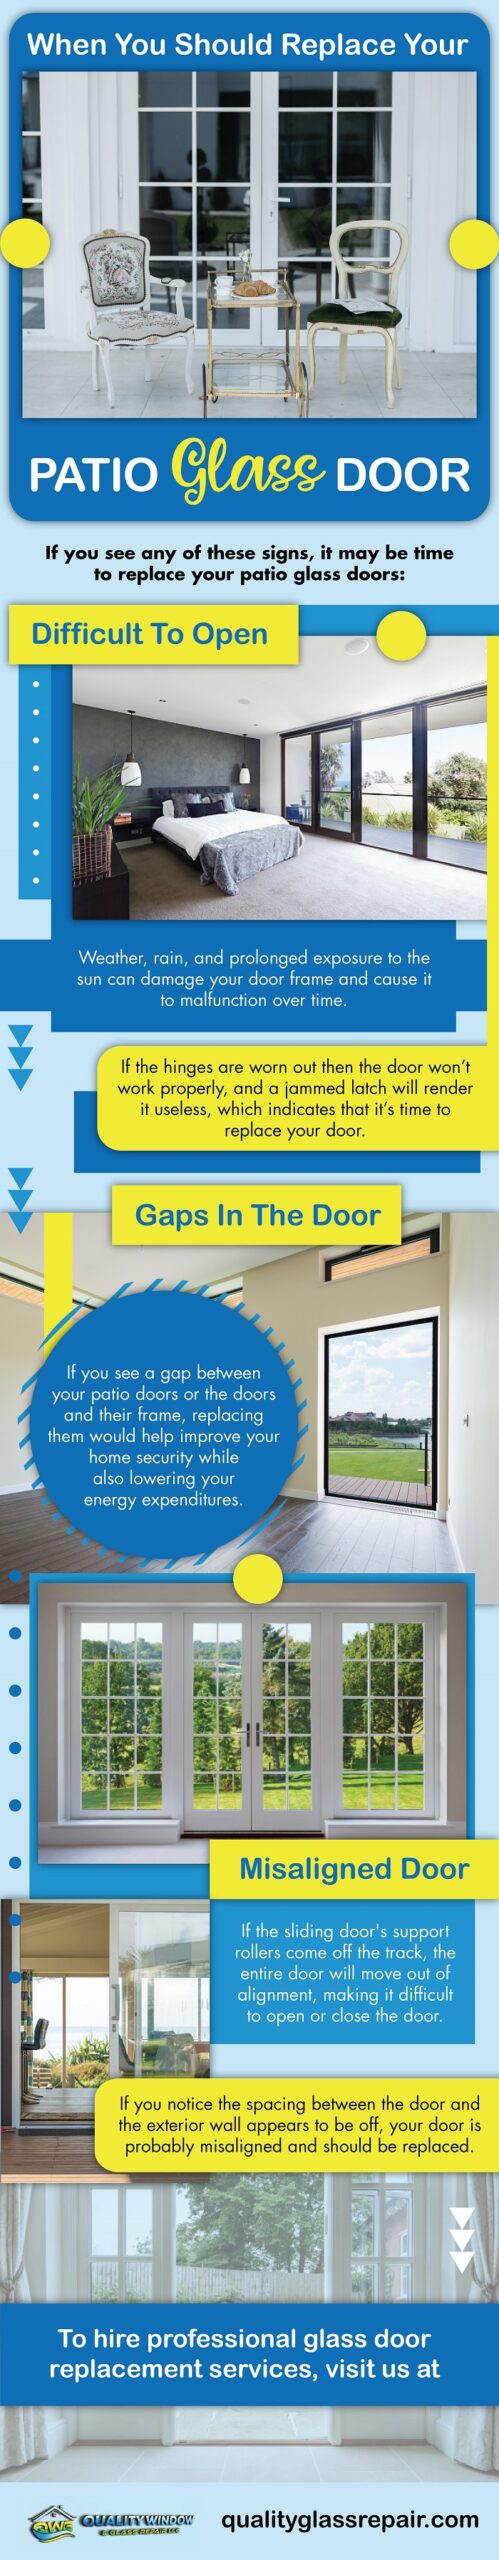 When You Should Replace Your Patio Glass Door